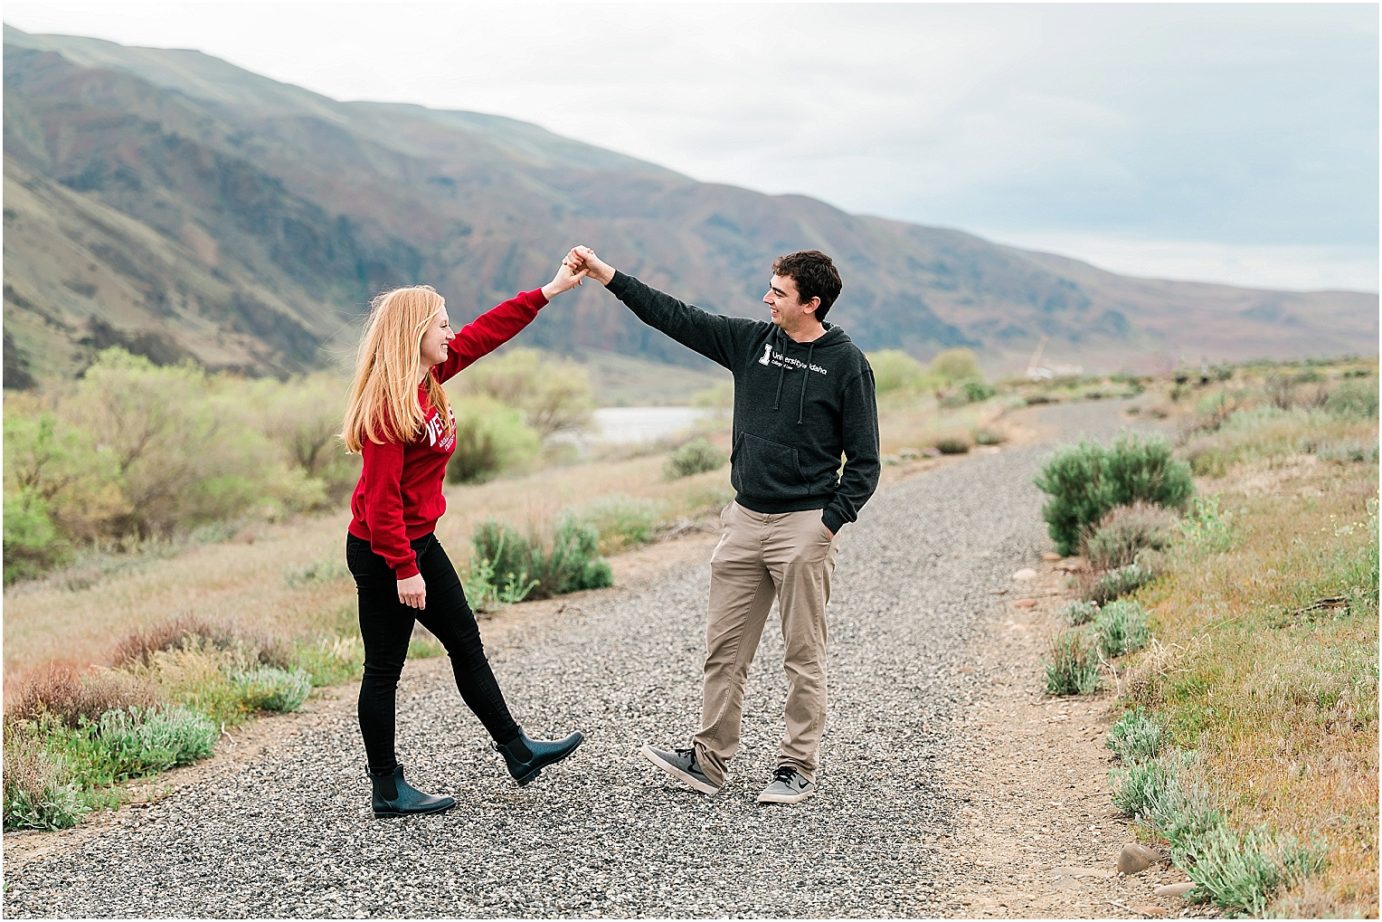 Eastern Washington engagement session Jack and Kirby dancing on walkway